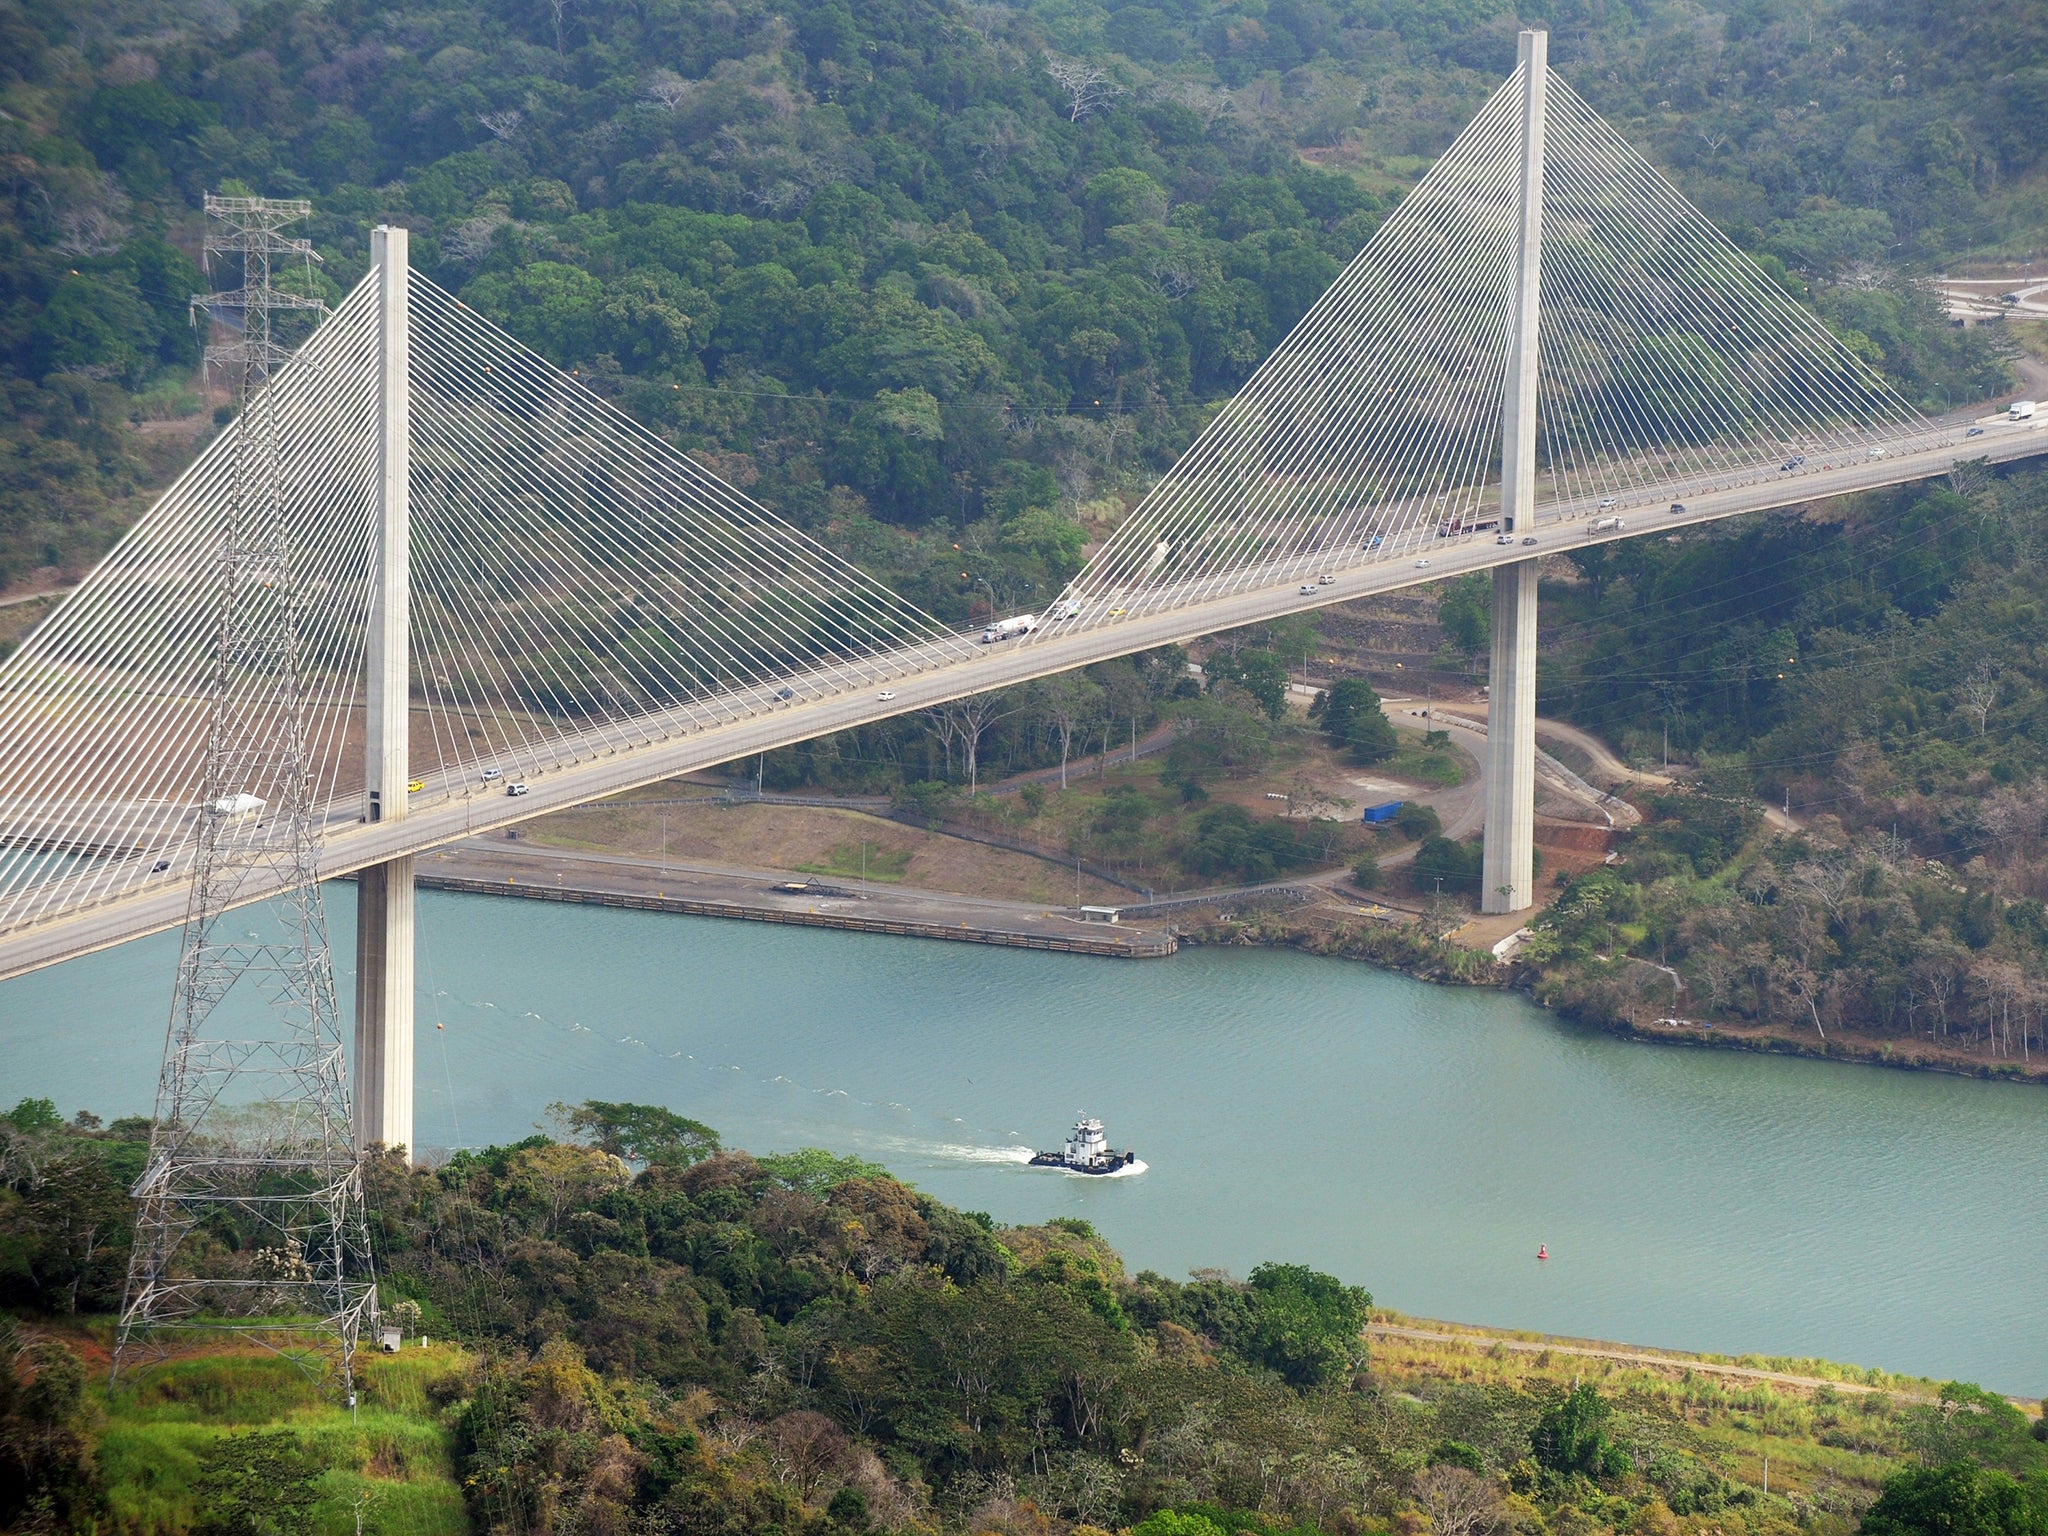 The Panama Canal is used by over 13,000 ships every year